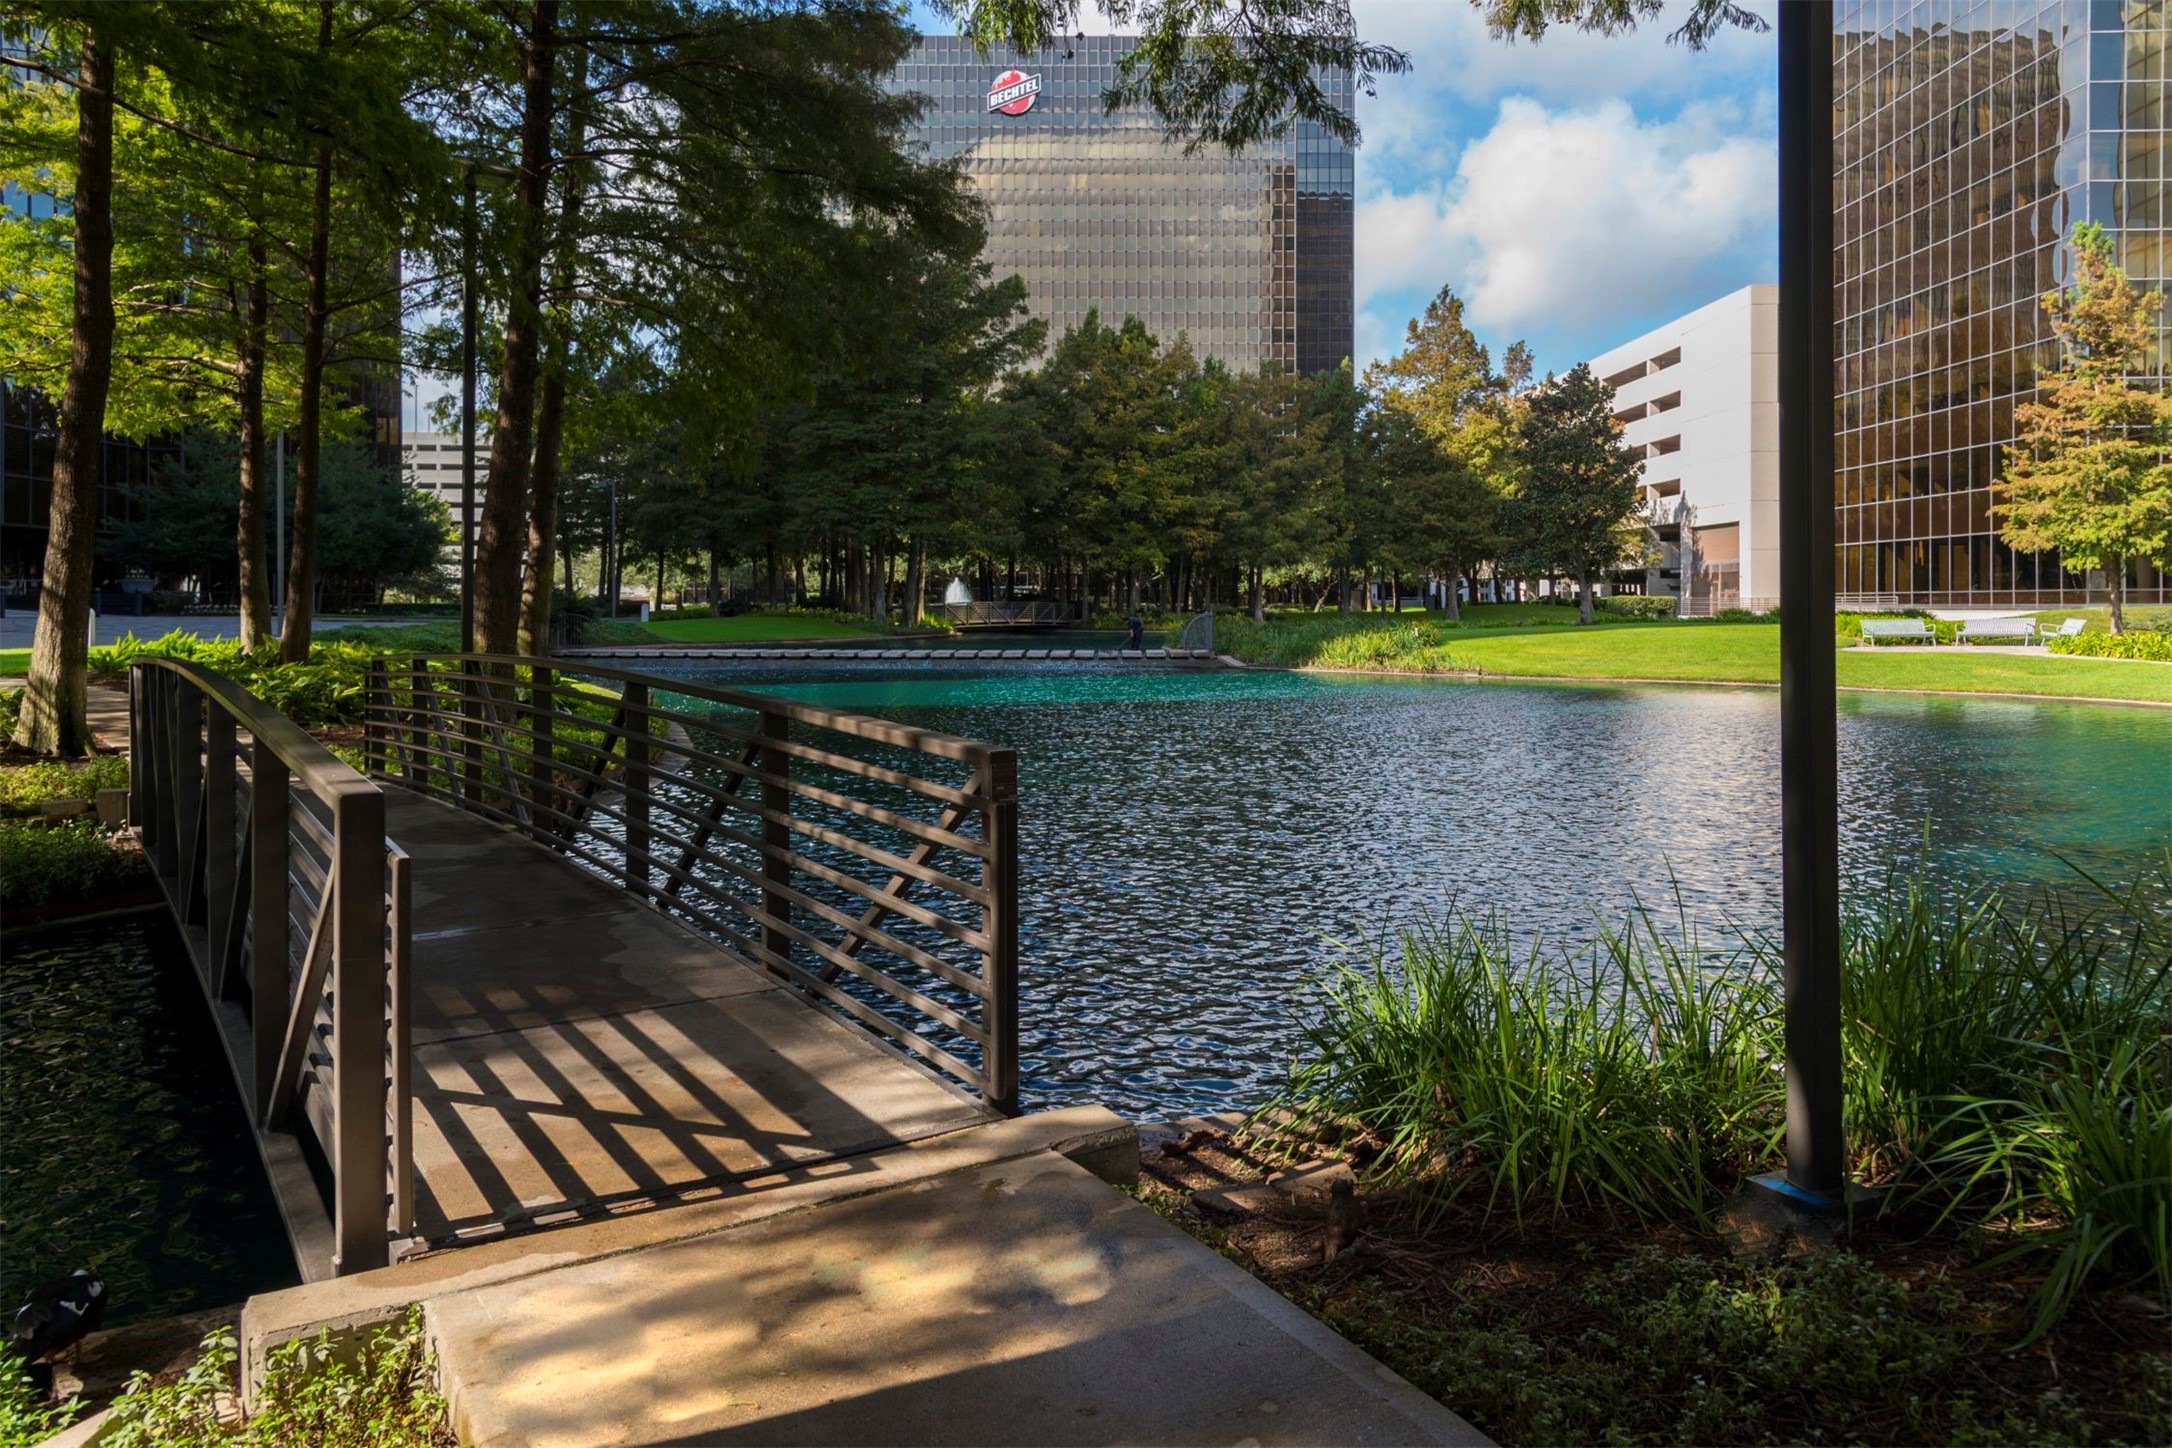 Walk out the back door to enjoy Post Oak lakes, which is a destination for relaxation and enjoyment.